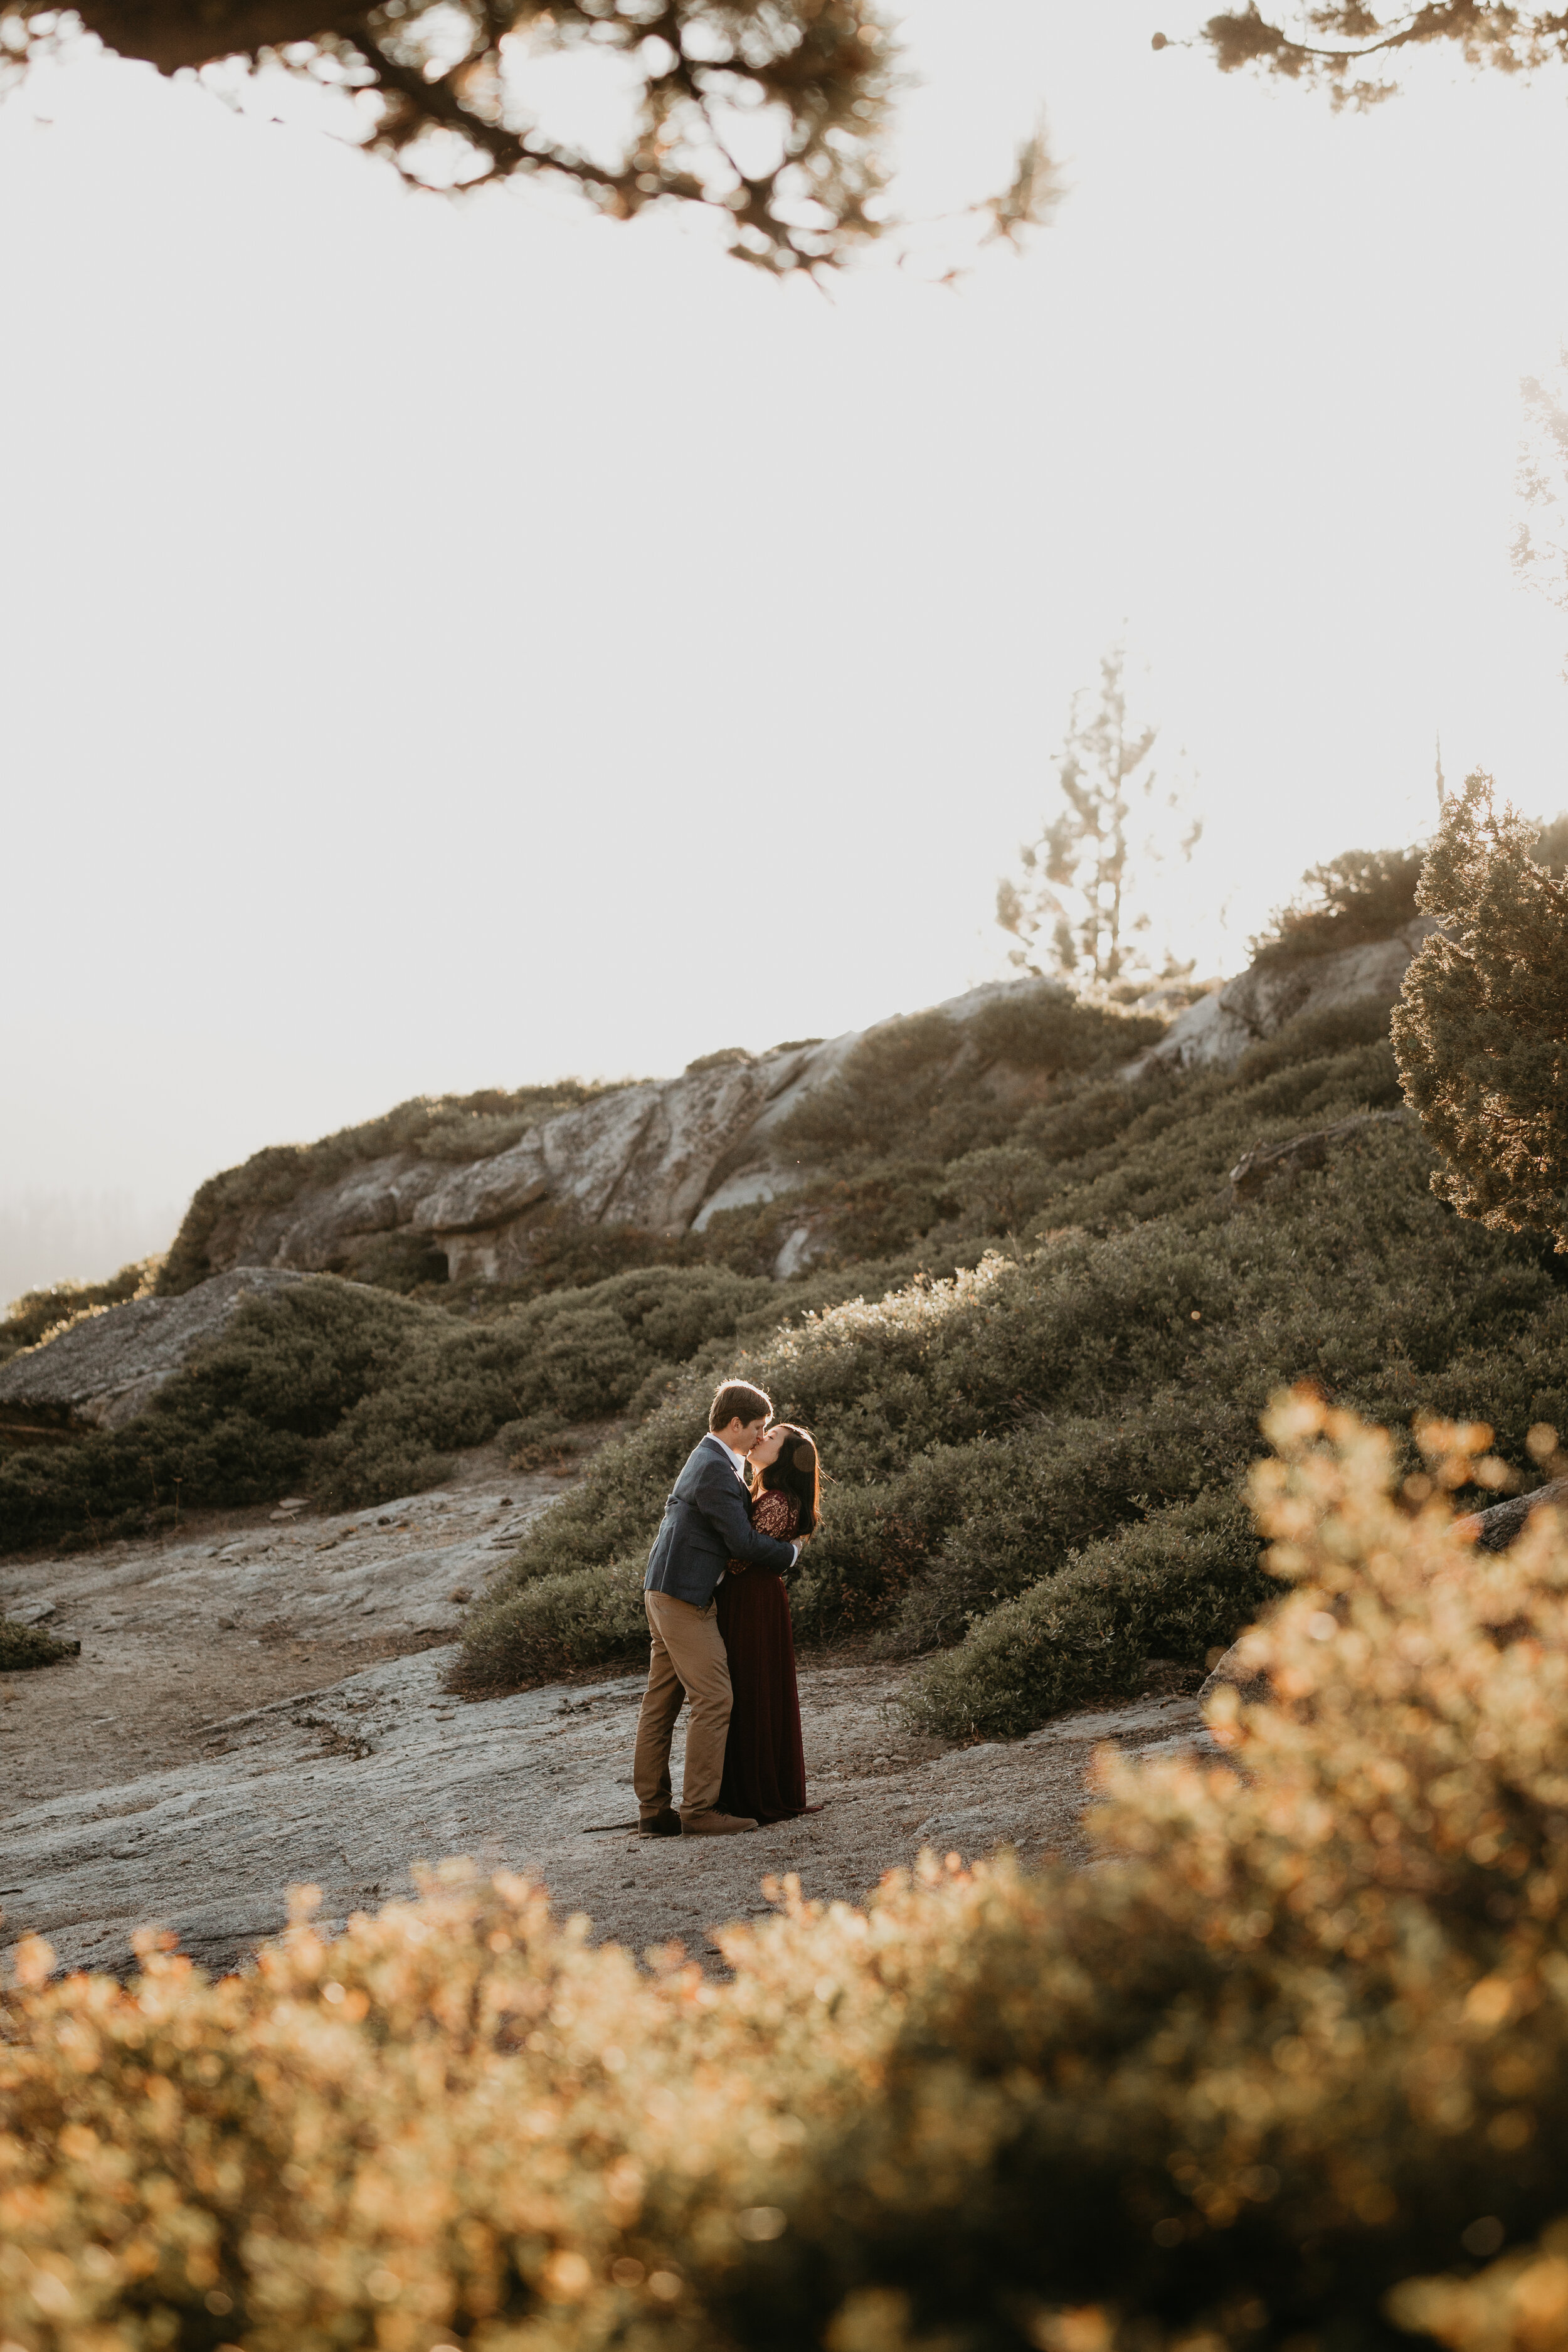 yosemite-national-park-couples-session-at-taft-point-and-yosemite-valley-yosemite-elopement-photographer-nicole-daacke-photography-128.jpg